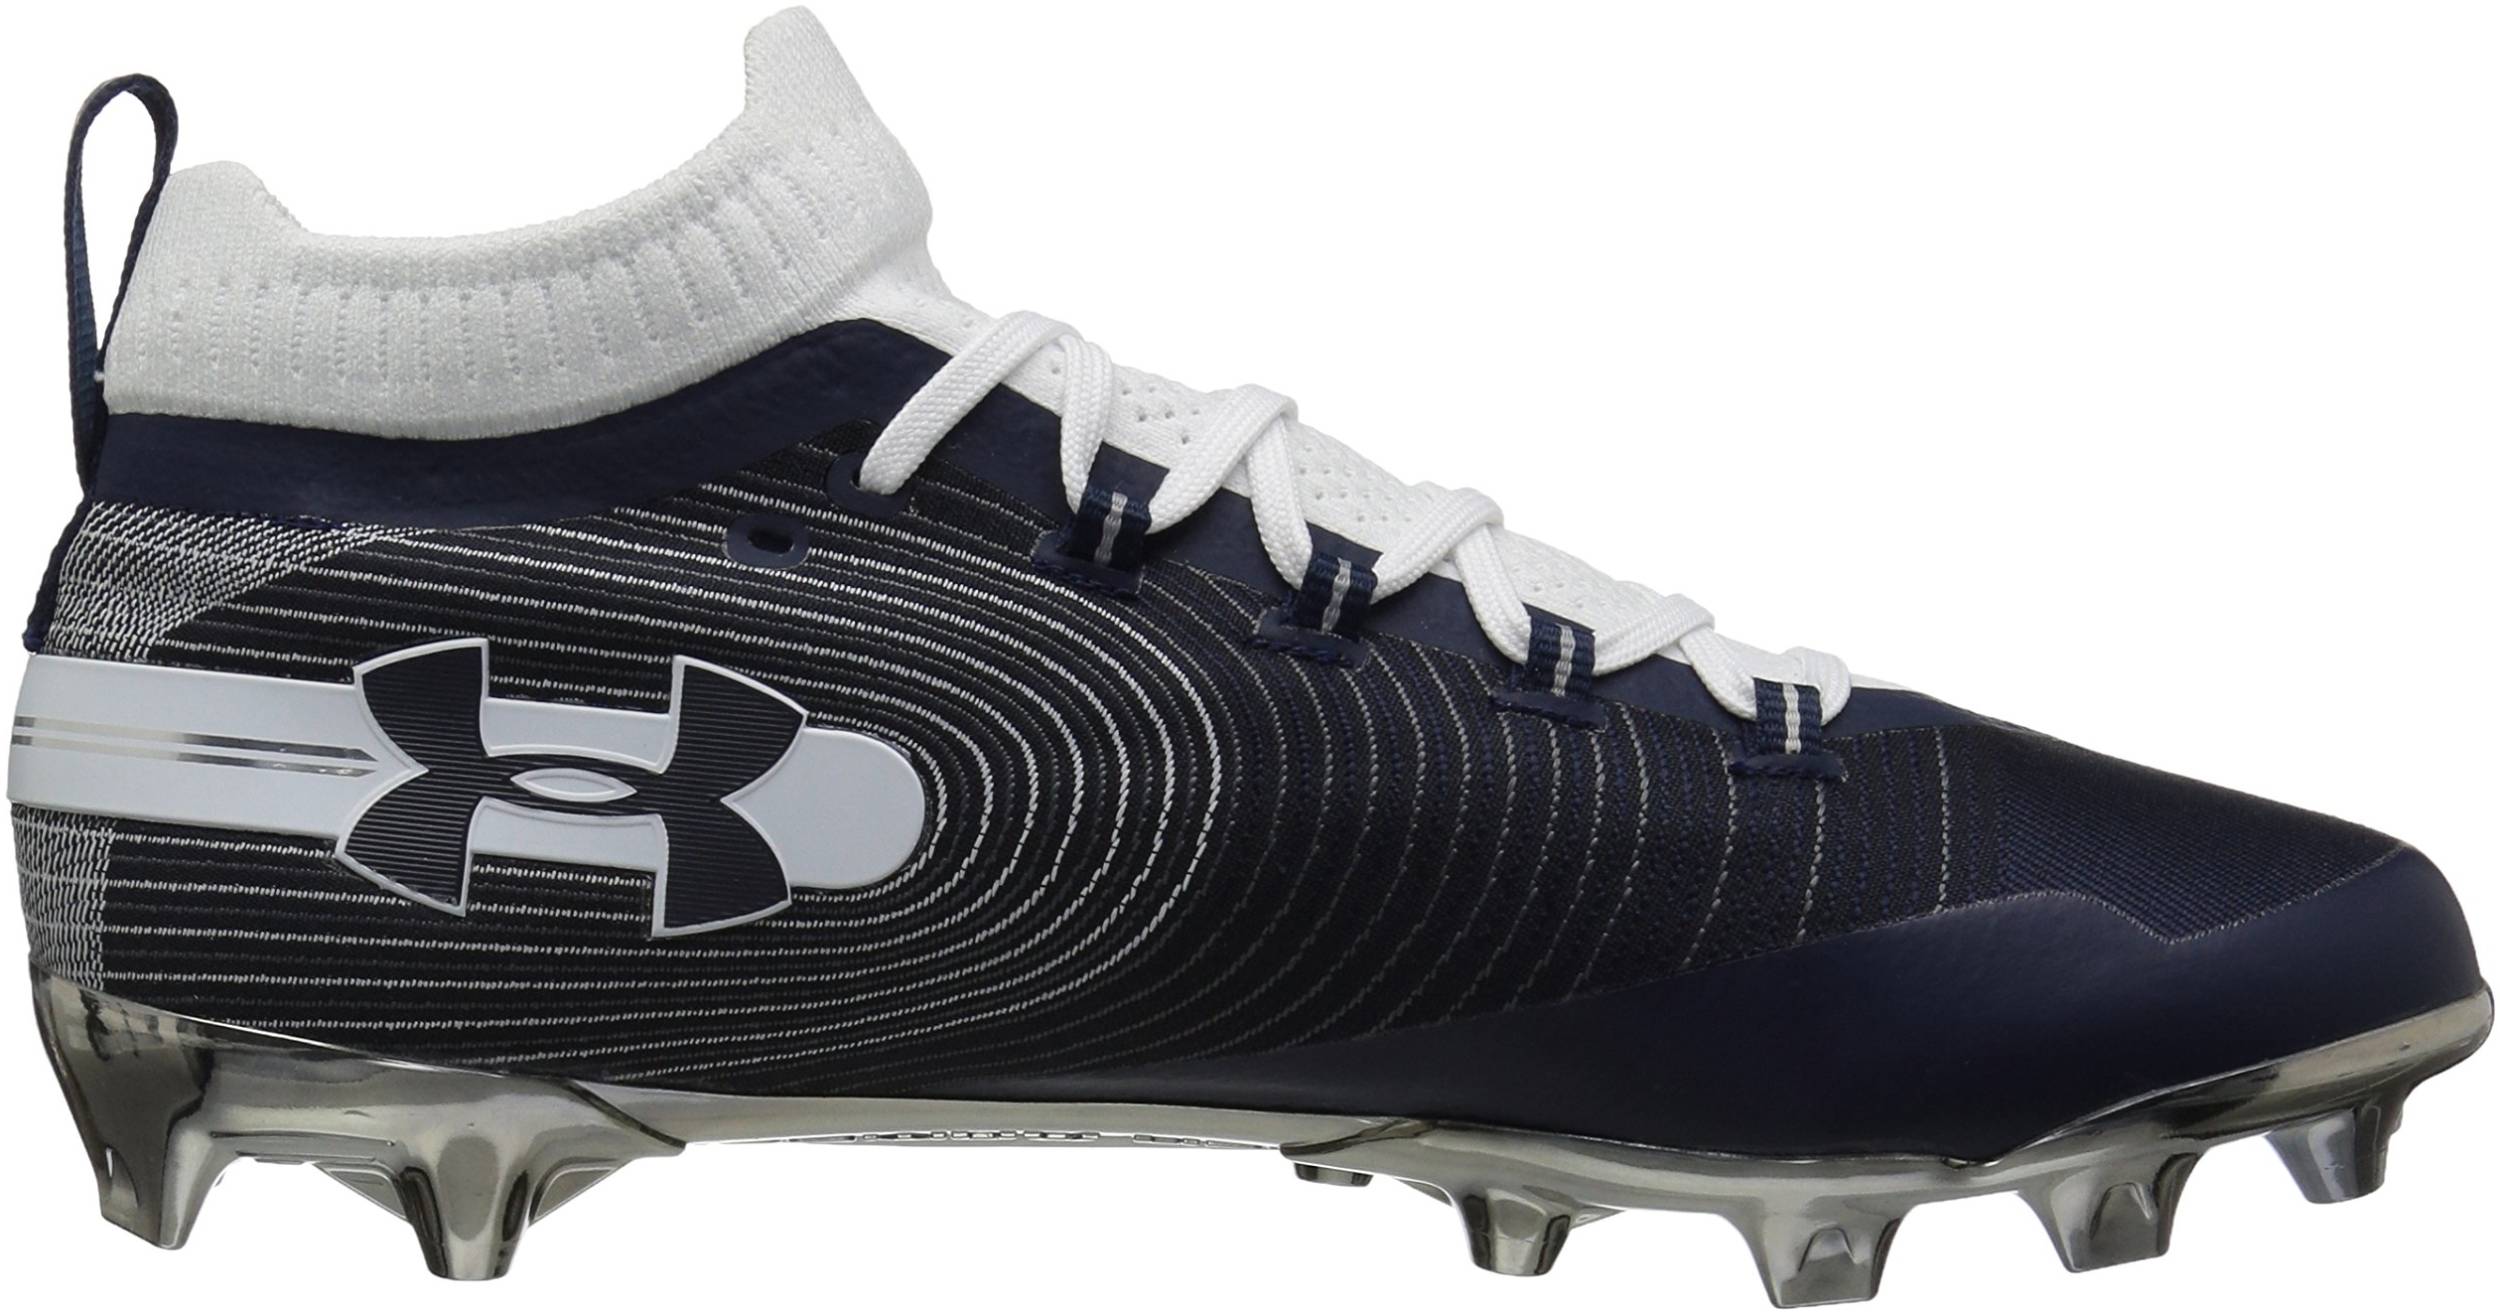 Save 53% on Blue Football Cleats (16 